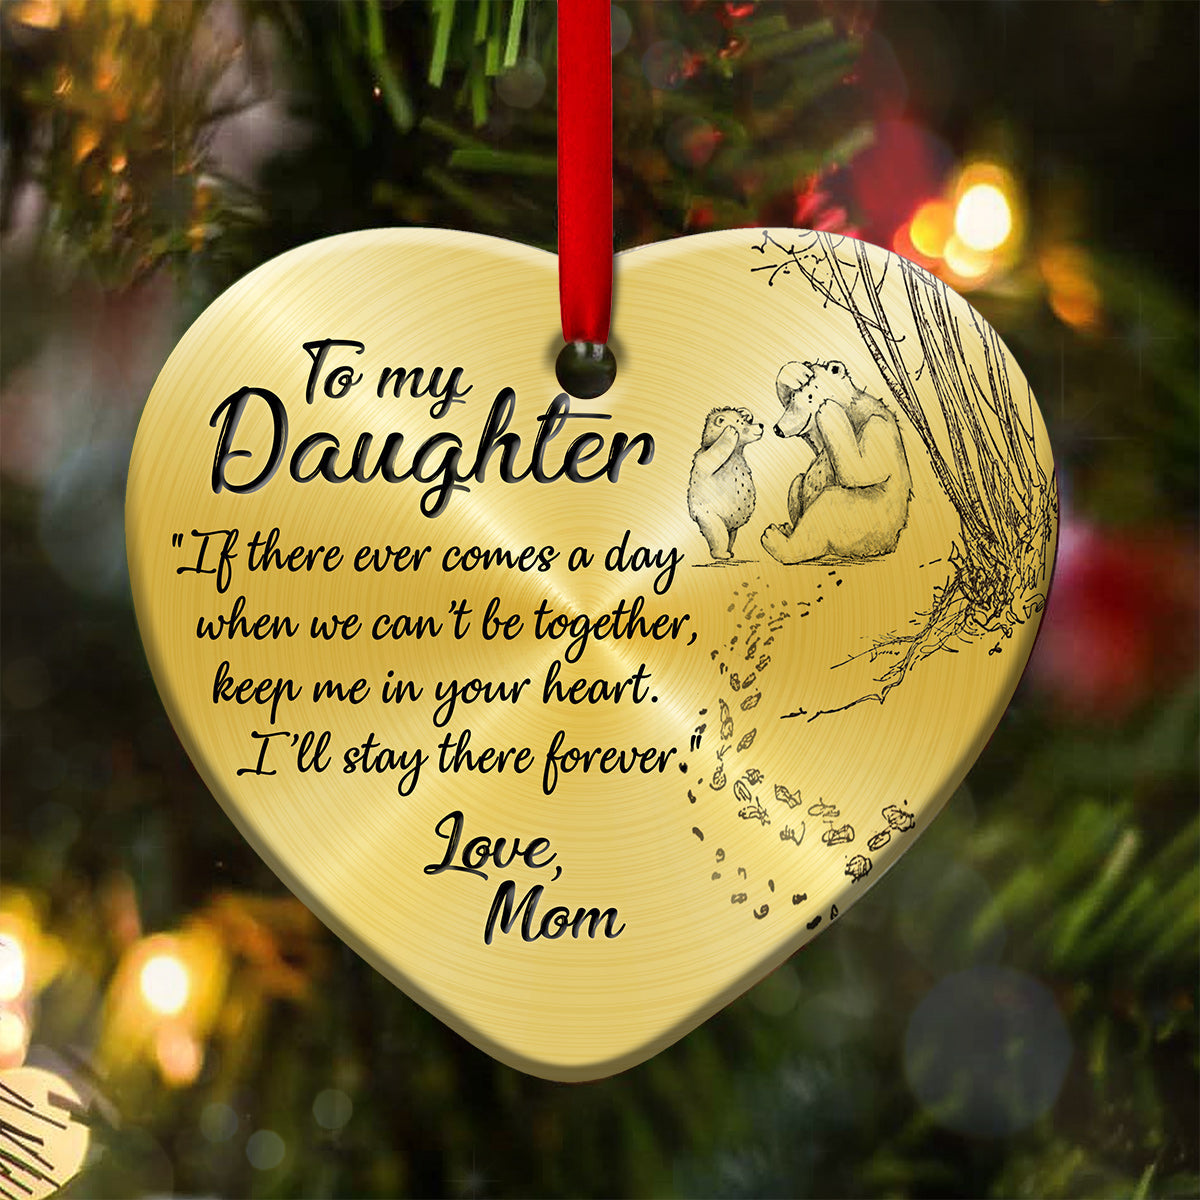 To My Daughter 8 Heart Ceramic Ornament - Christmas Ornament - Christmas Gift